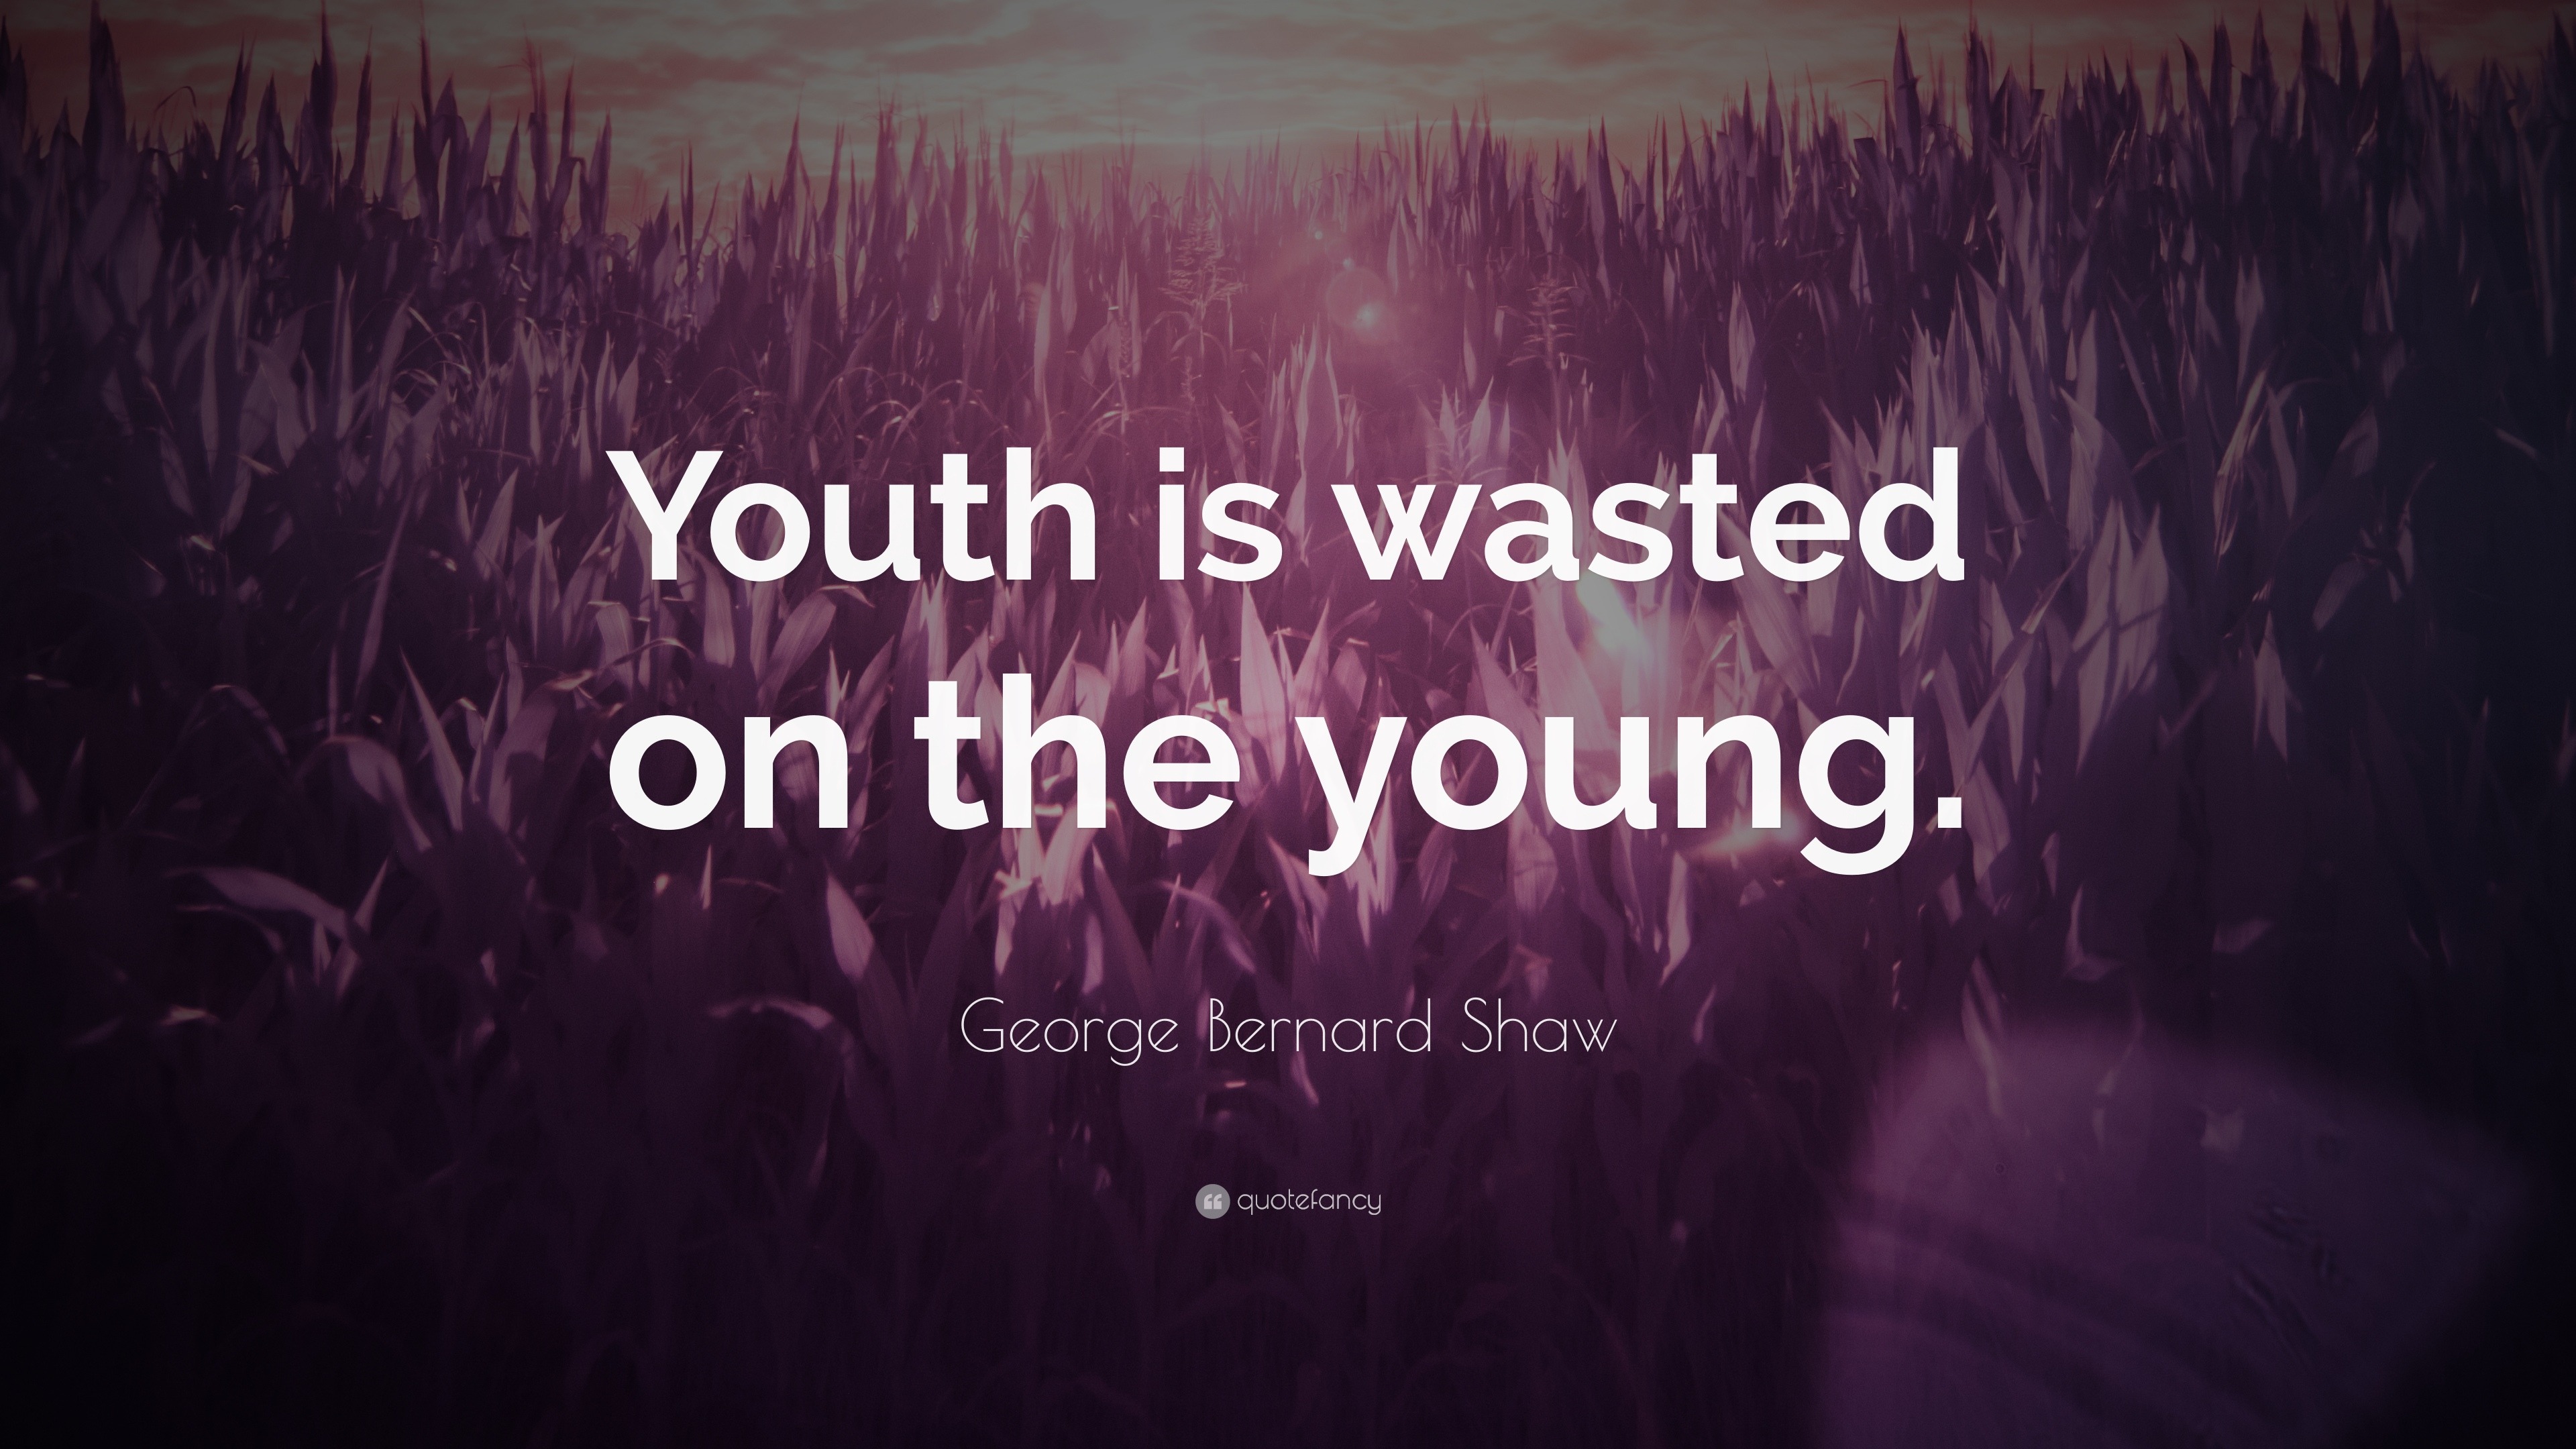 George Bernard Shaw Quote: “Youth is wasted on the young.” (25